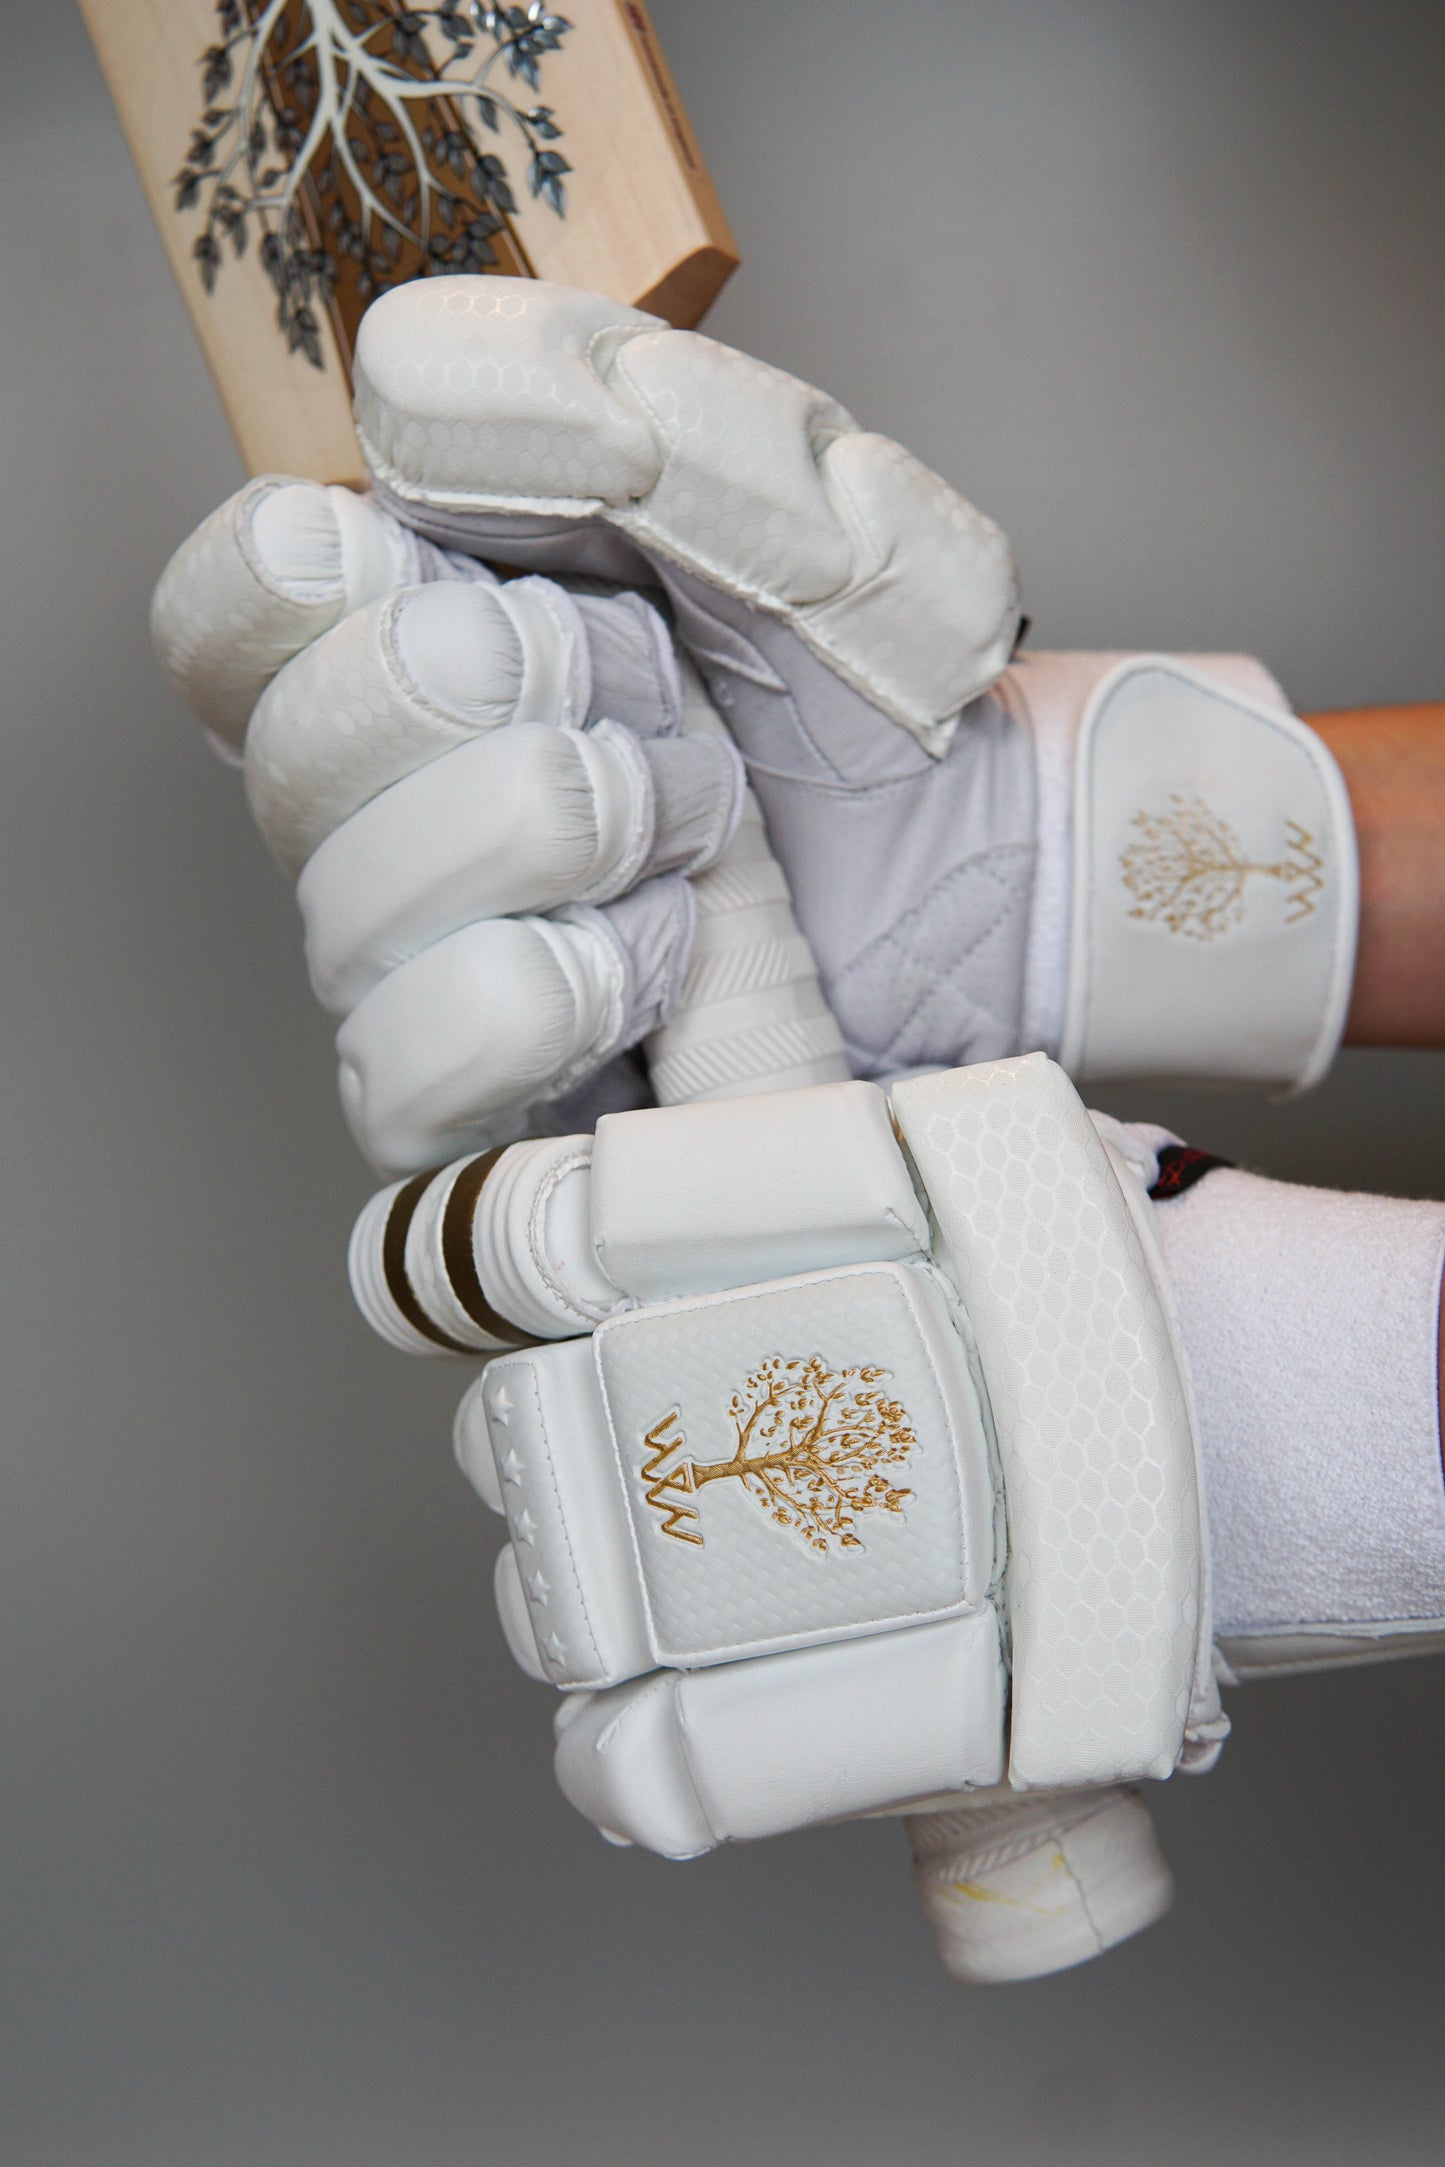 Compliment any bat in the Willow Twin range with Willow Twin cricket batting gloves